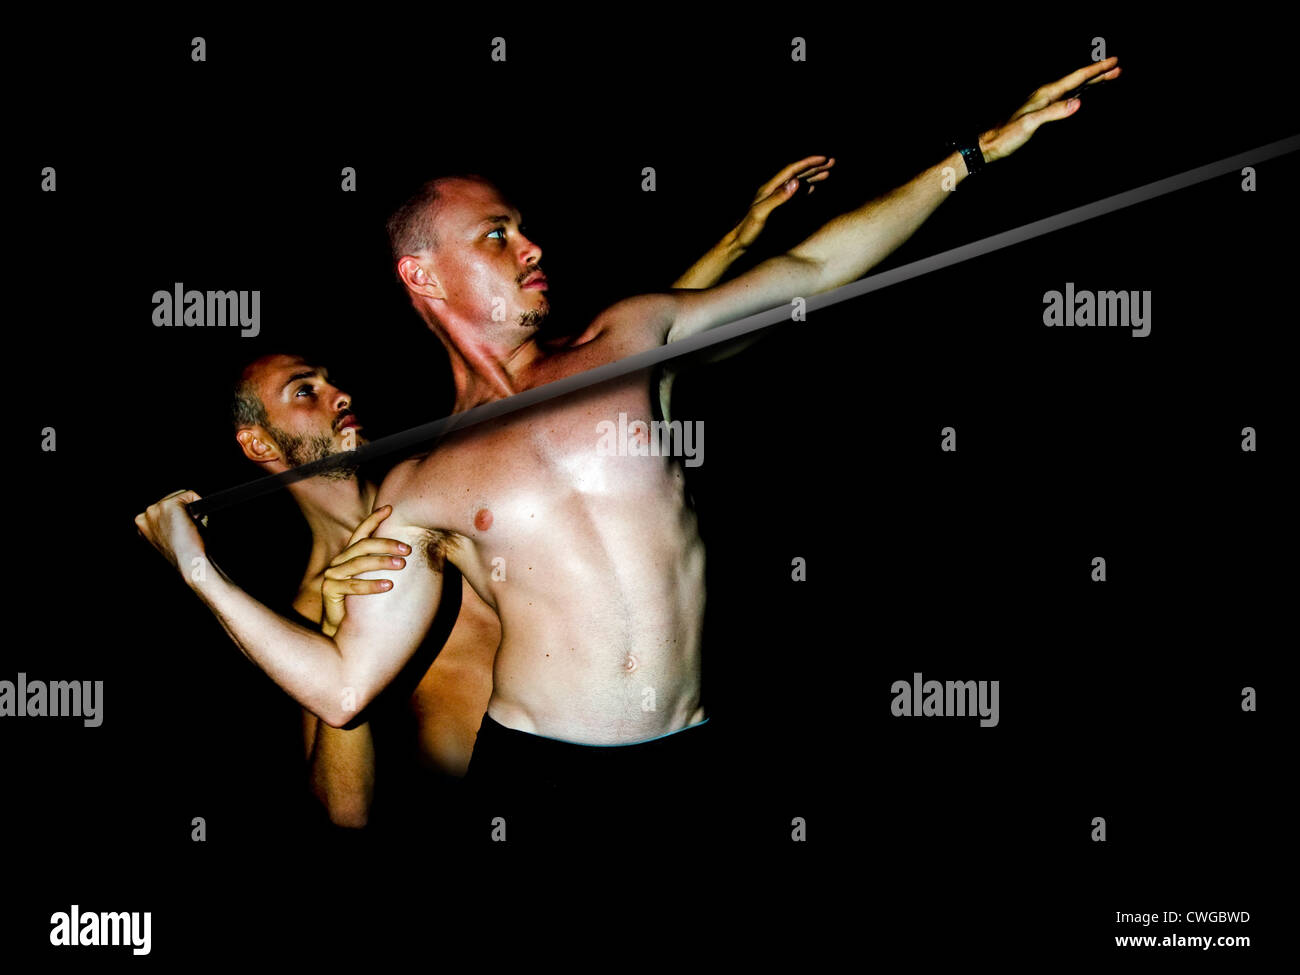 men throwing a spear Stock Photo